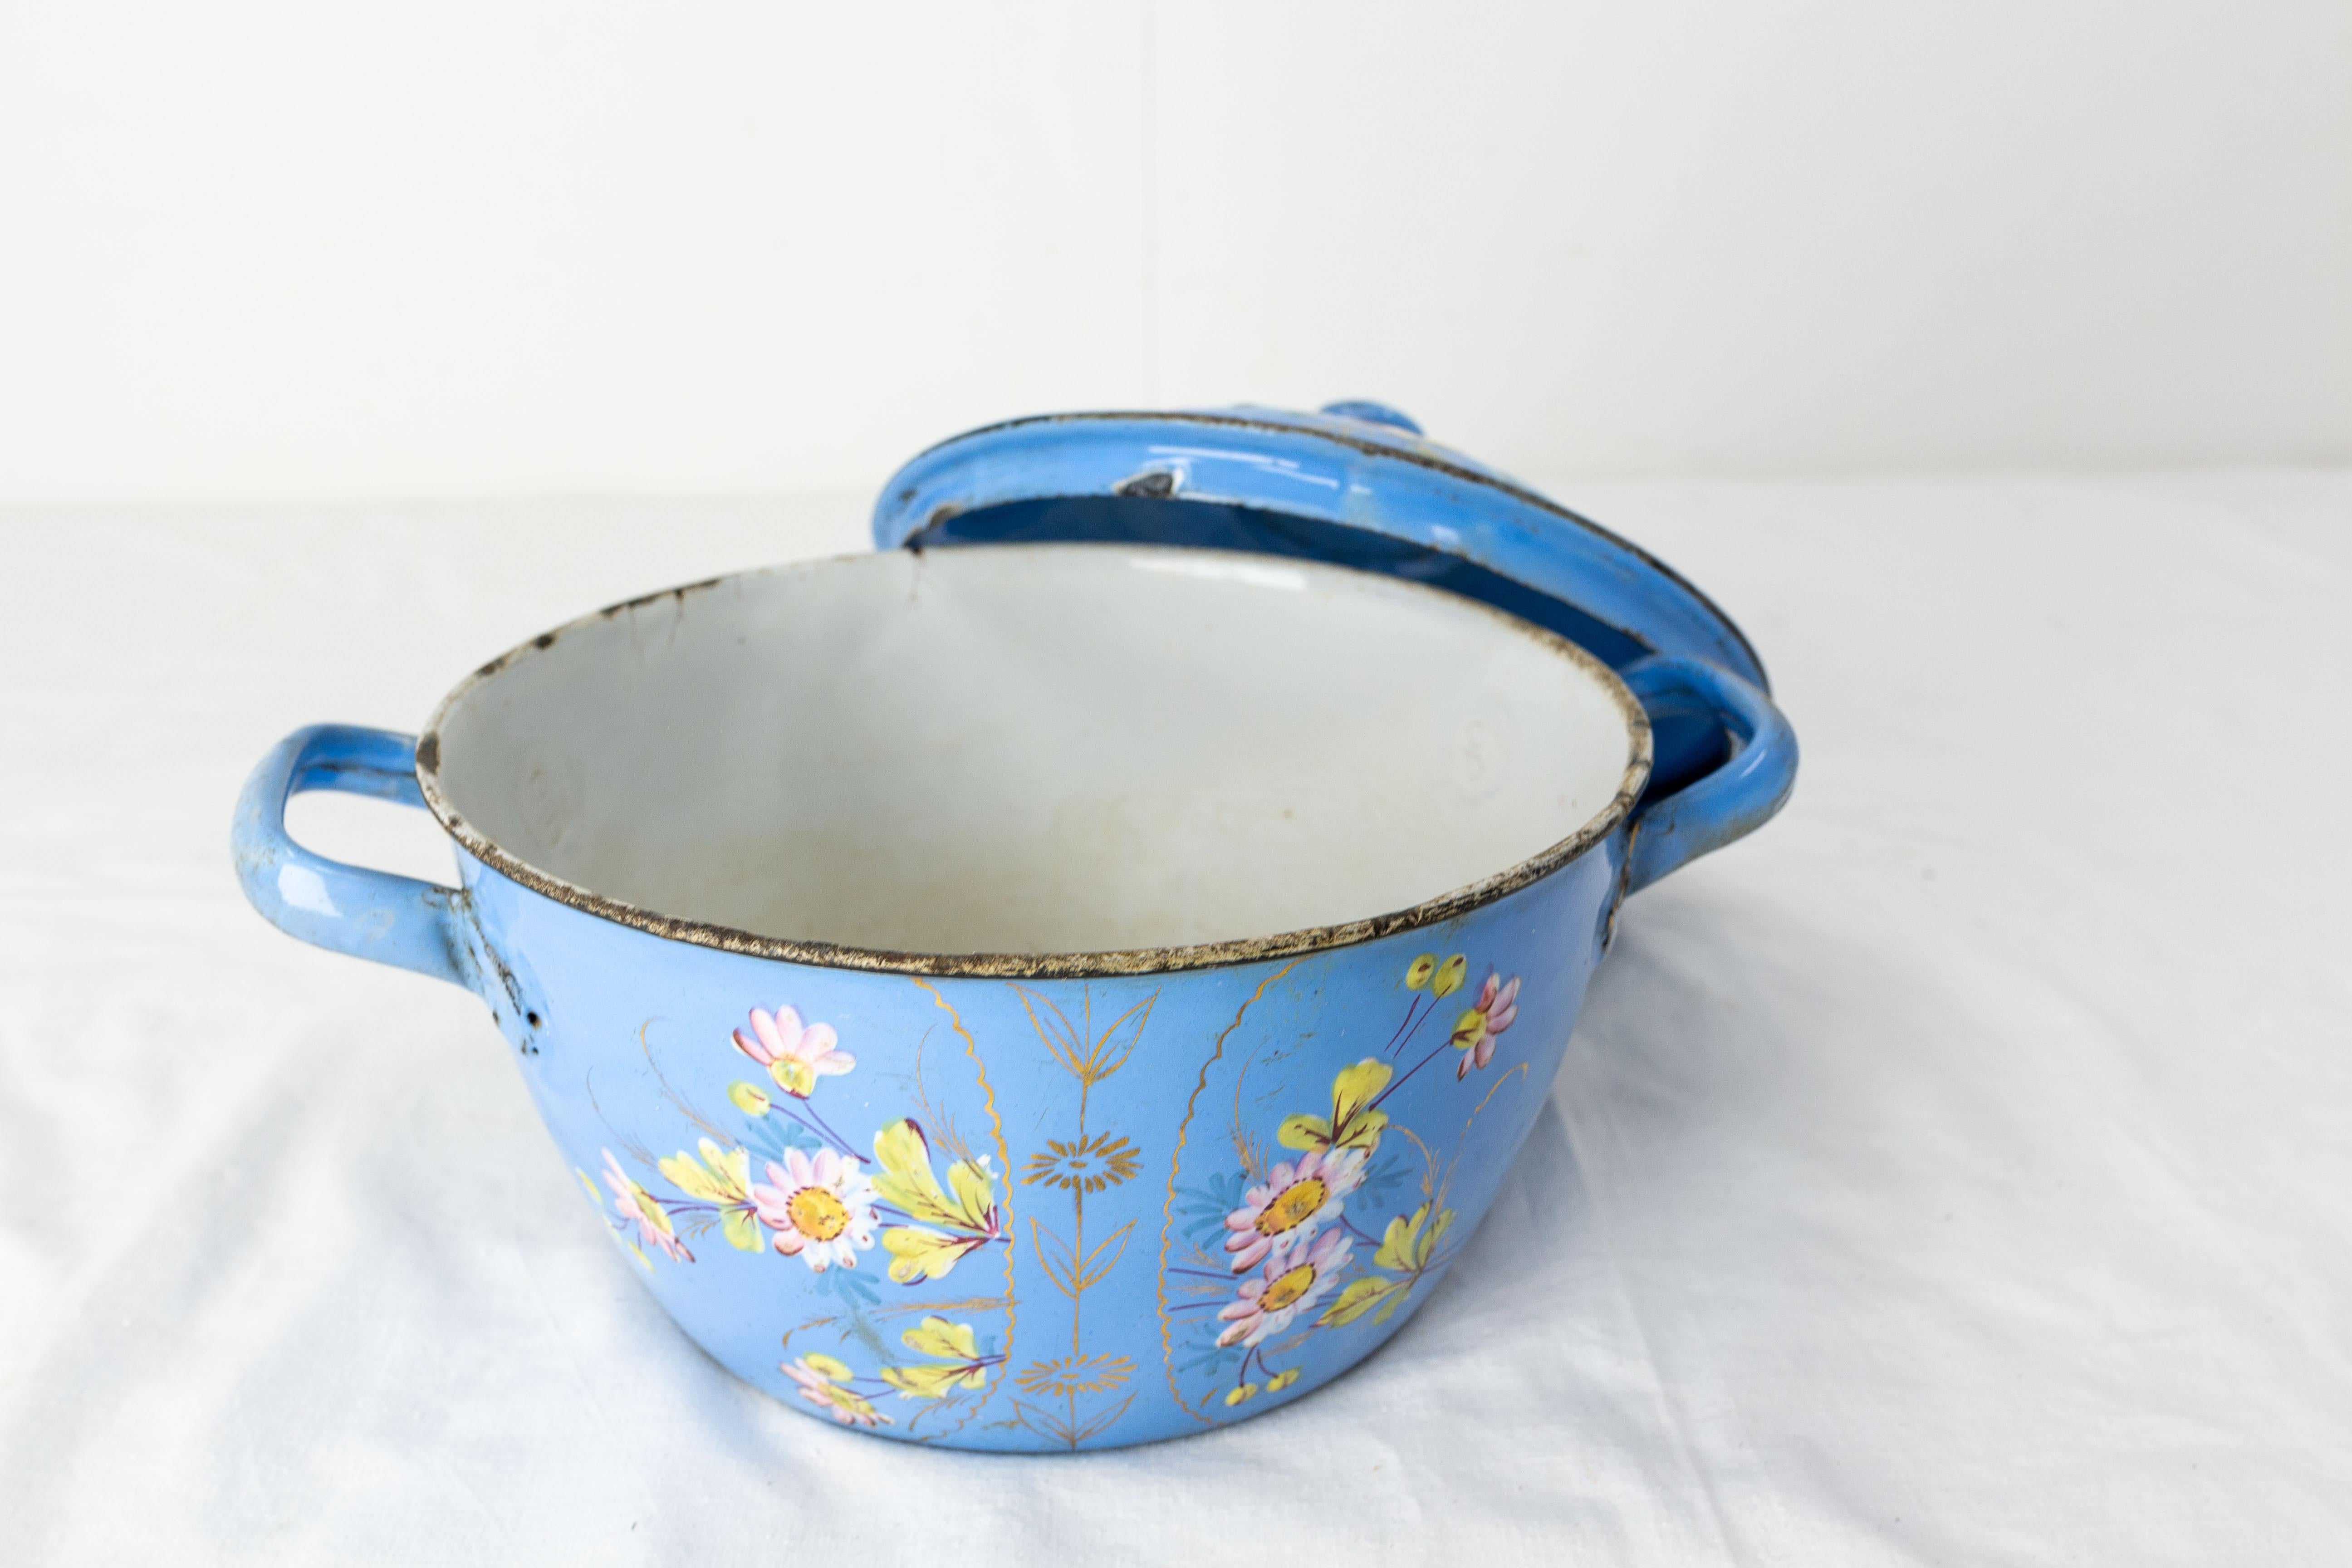 French Country Blue Soup Tureen with Floral Decoration, Enameled Iron, C. 1900 For Sale 2